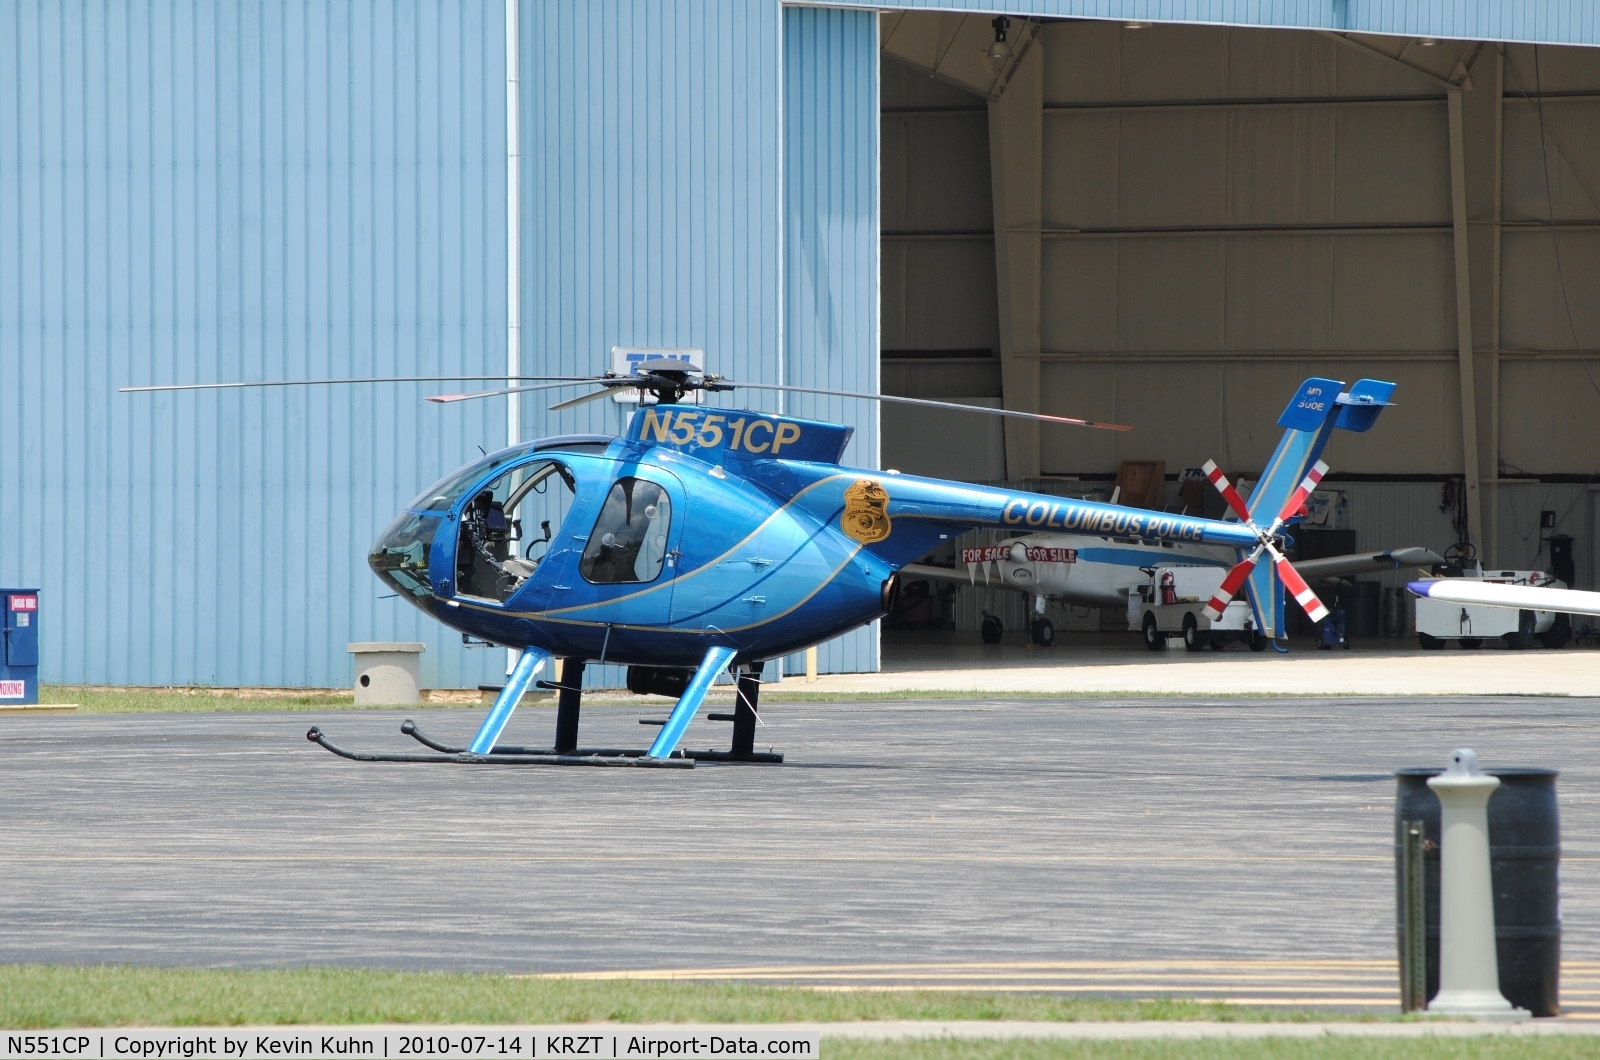 N551CP, 2006 MD Helicopters 369E C/N 0571E, A bit south of Columbus